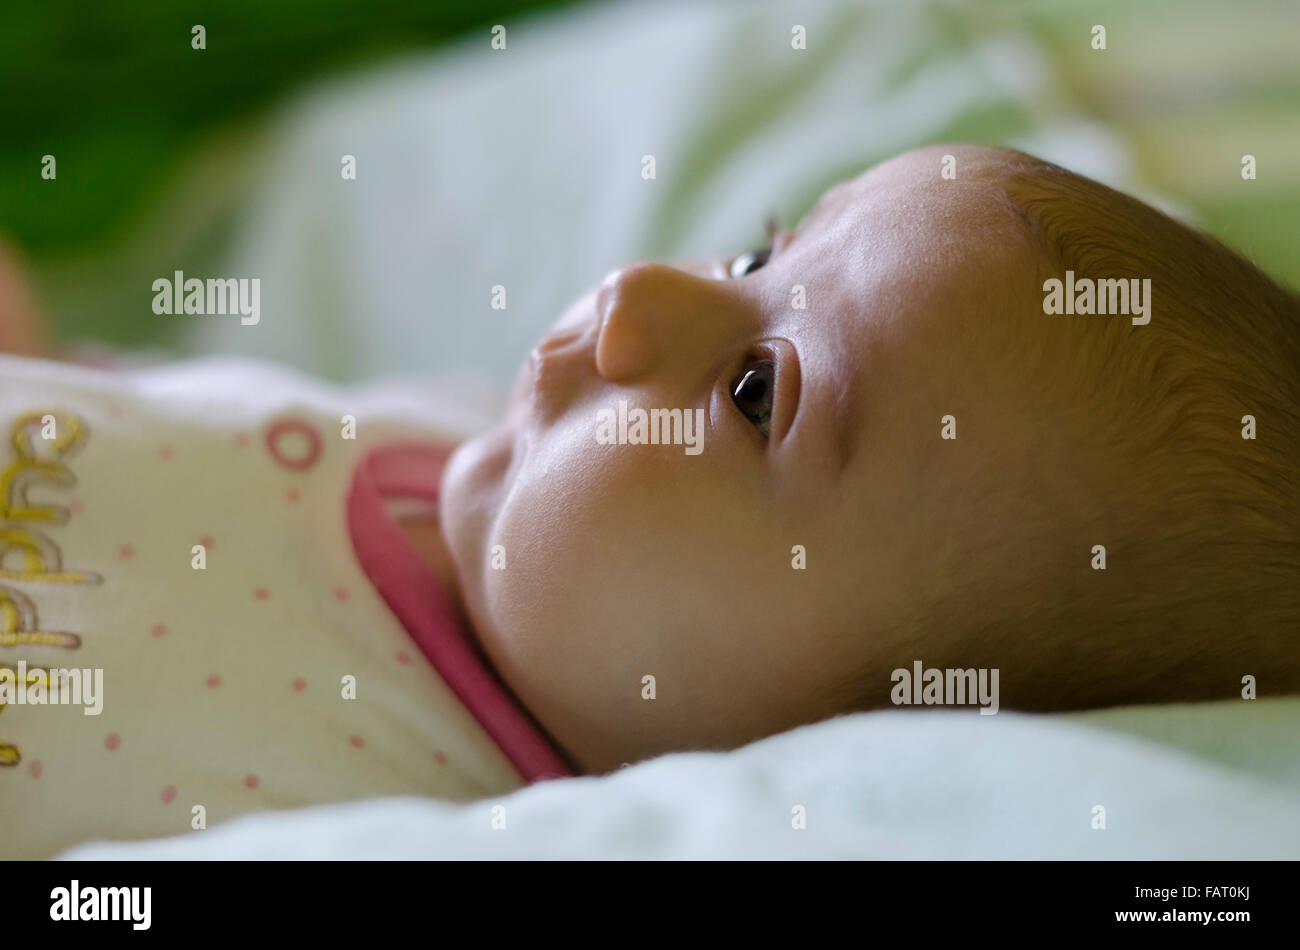 A cute little baby‘s profile Stock Photo